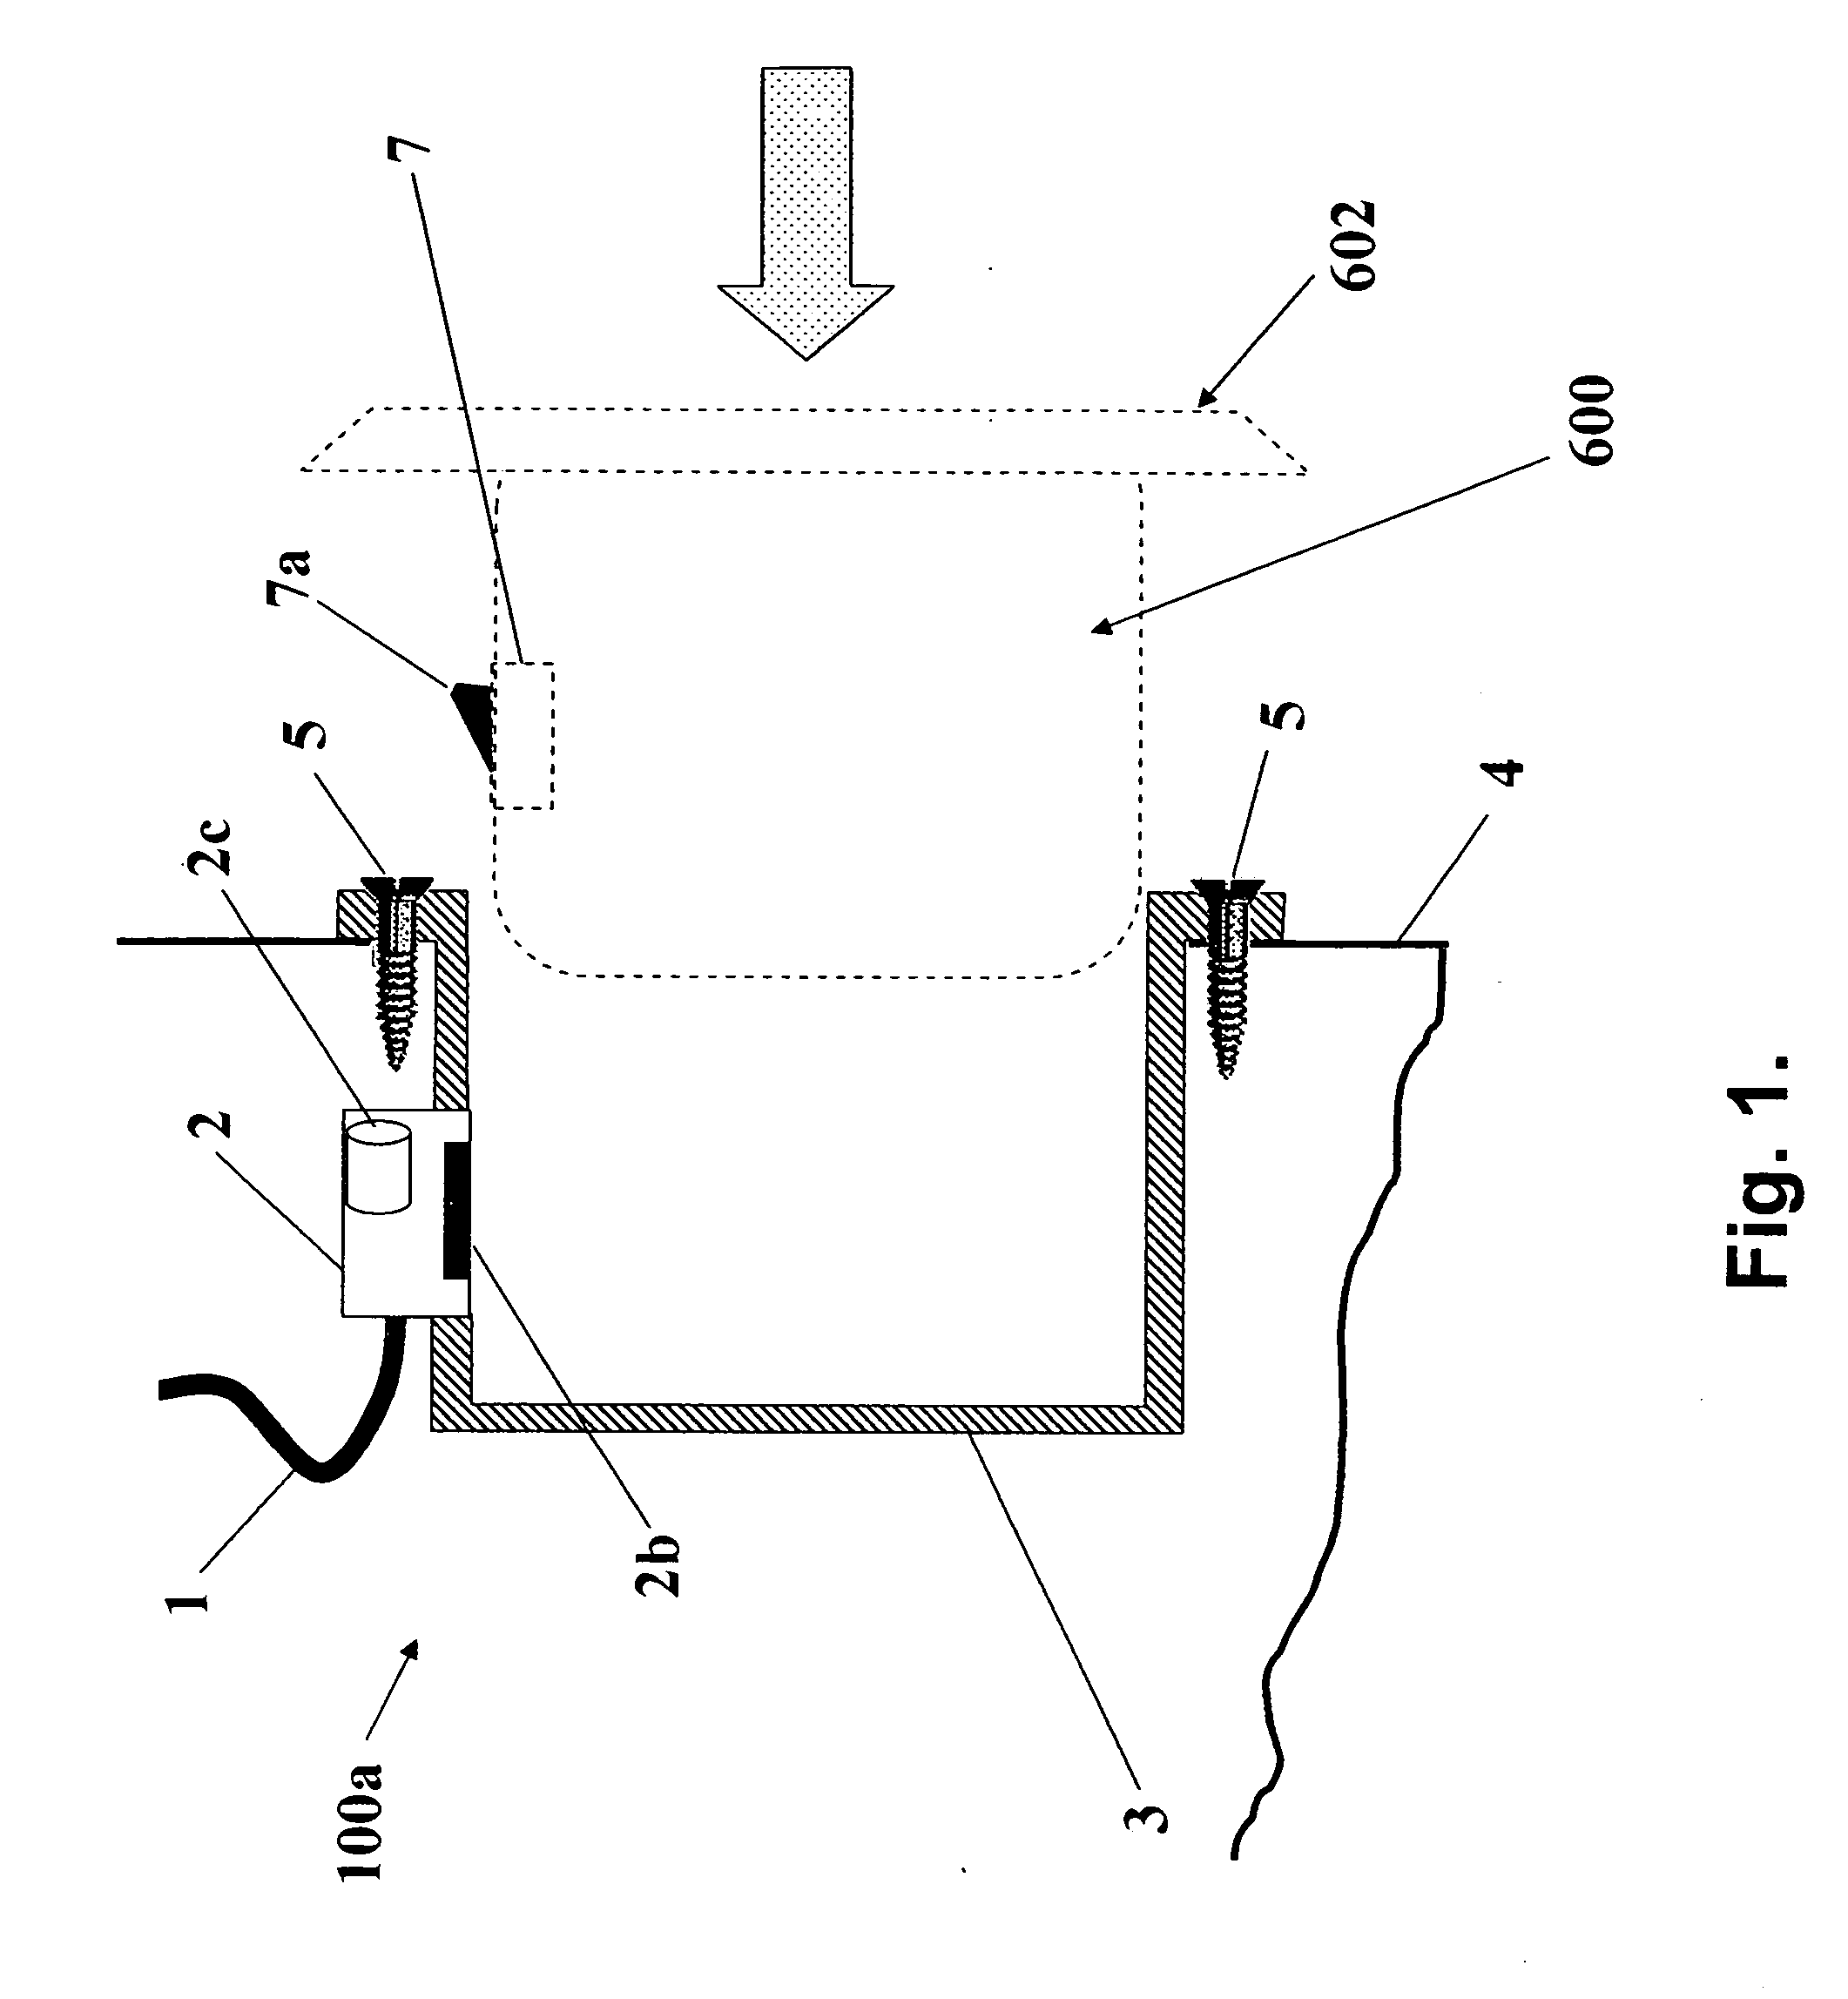 Wall mounted housing for insertable computing apparatus